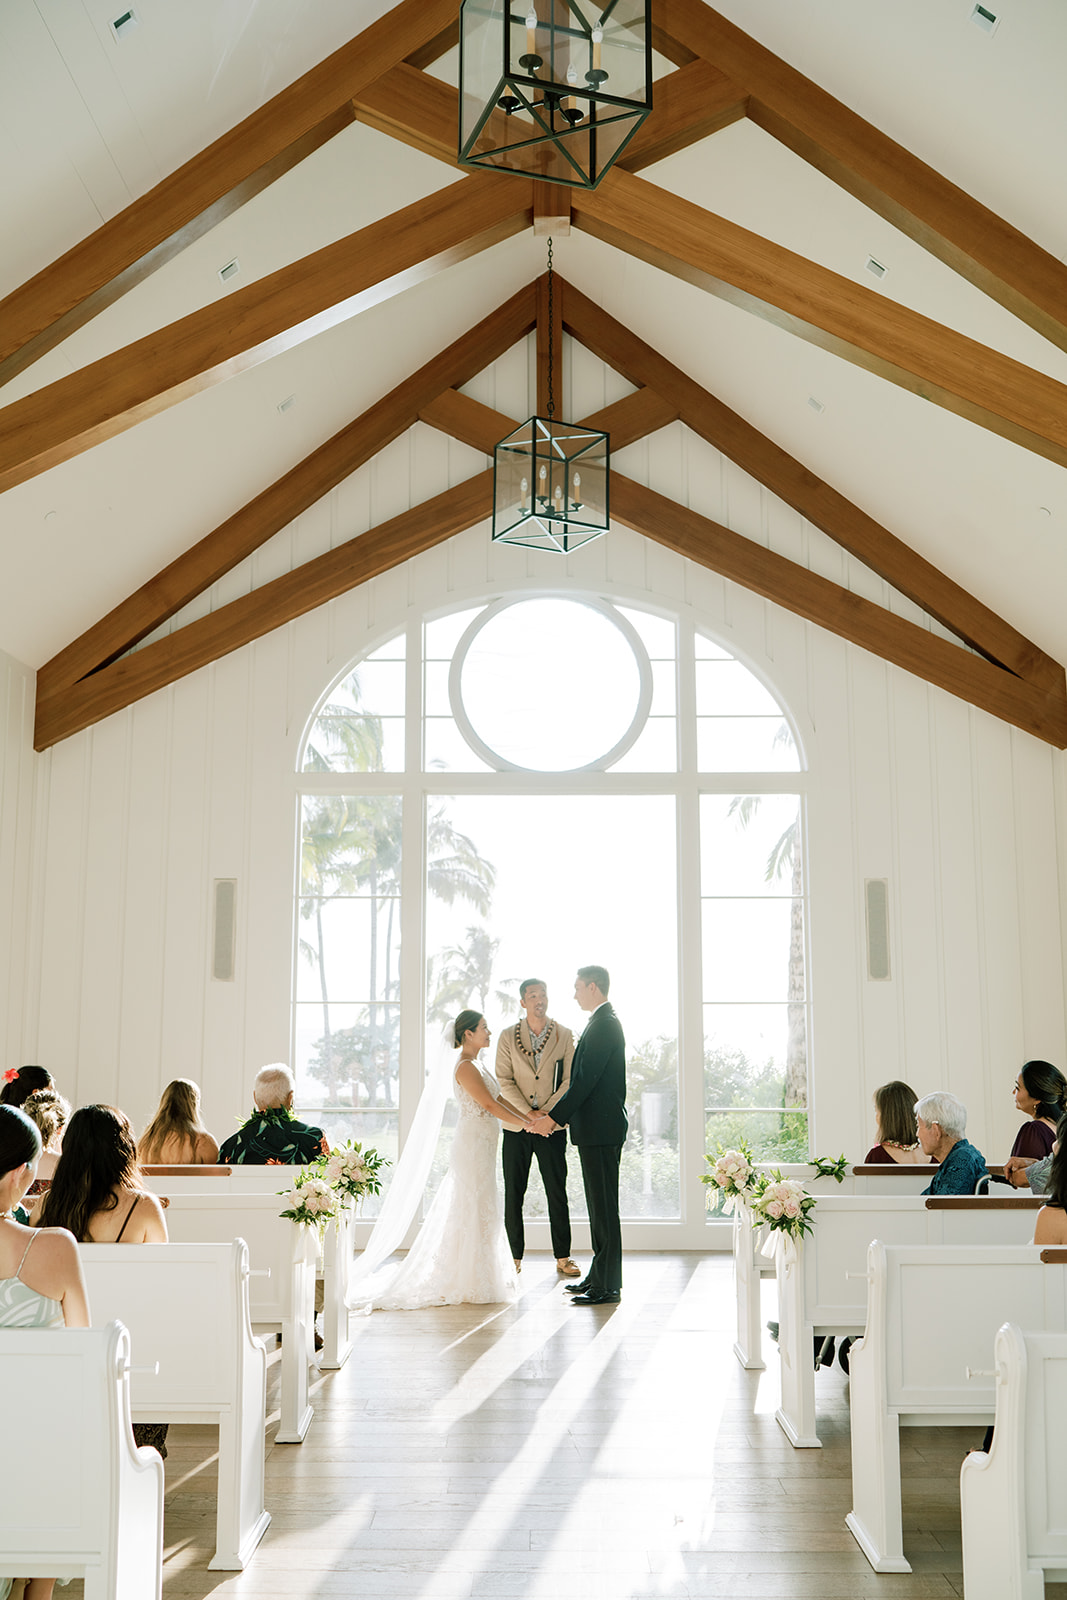 A wedding ceremony in a church with wooden pews captured by Megan Moura Wedding Photographer.